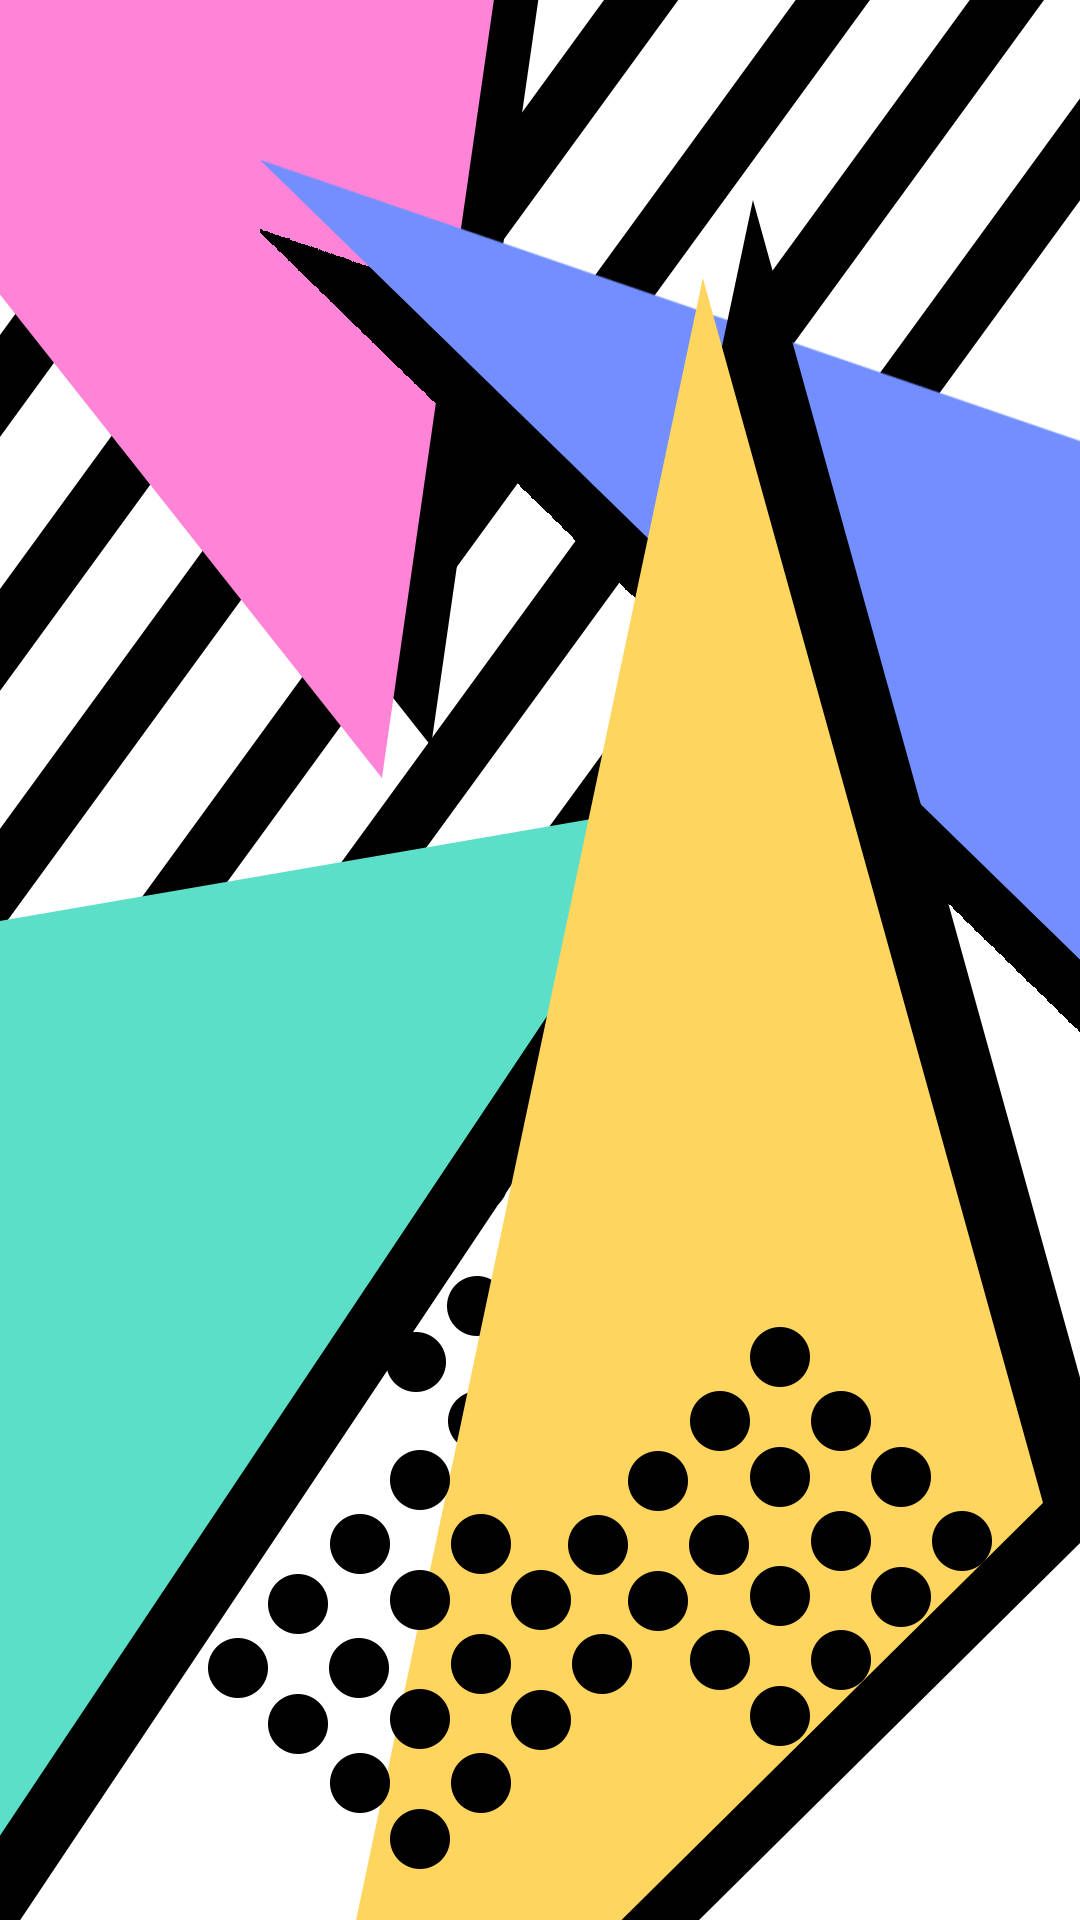 A colorful abstract design with a mix of geometric shapes and patterns. - Geometry